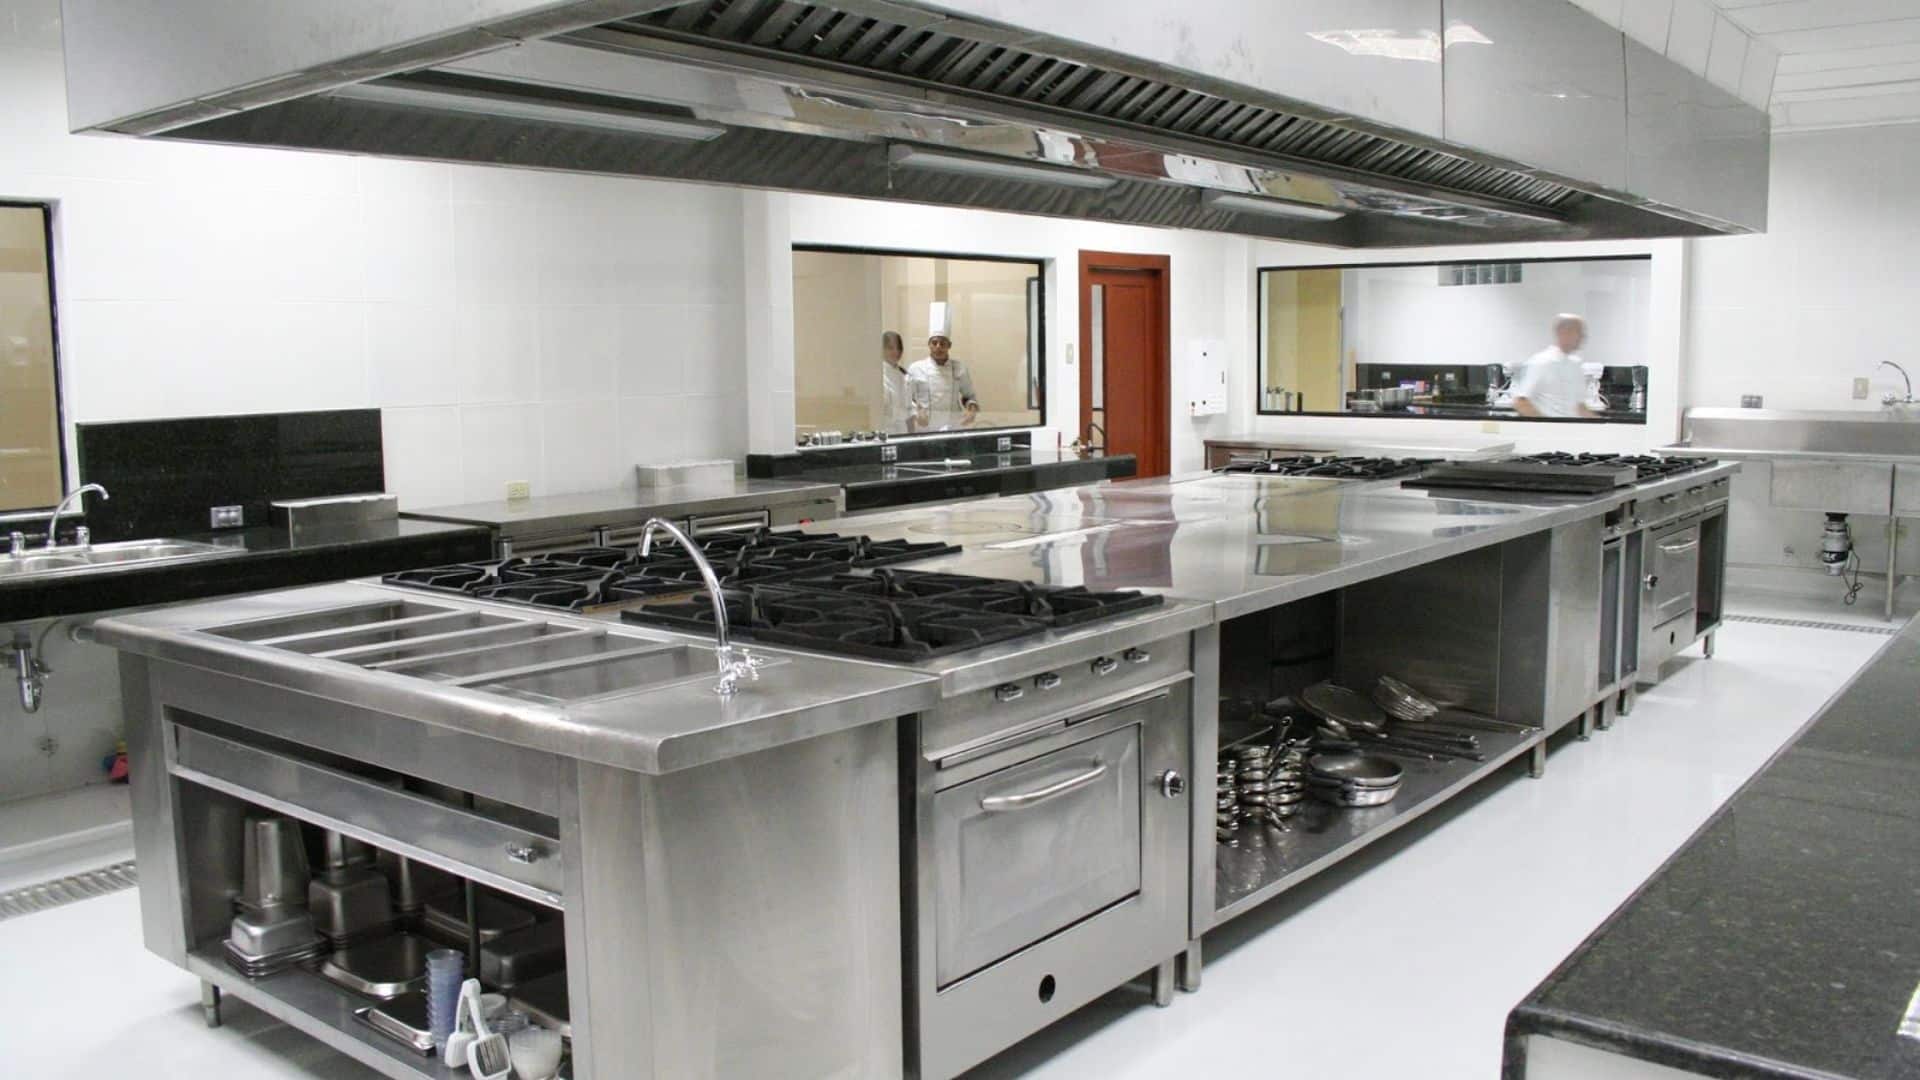 What Makes Stainless Steel Ideal for Kitchen Fabrication